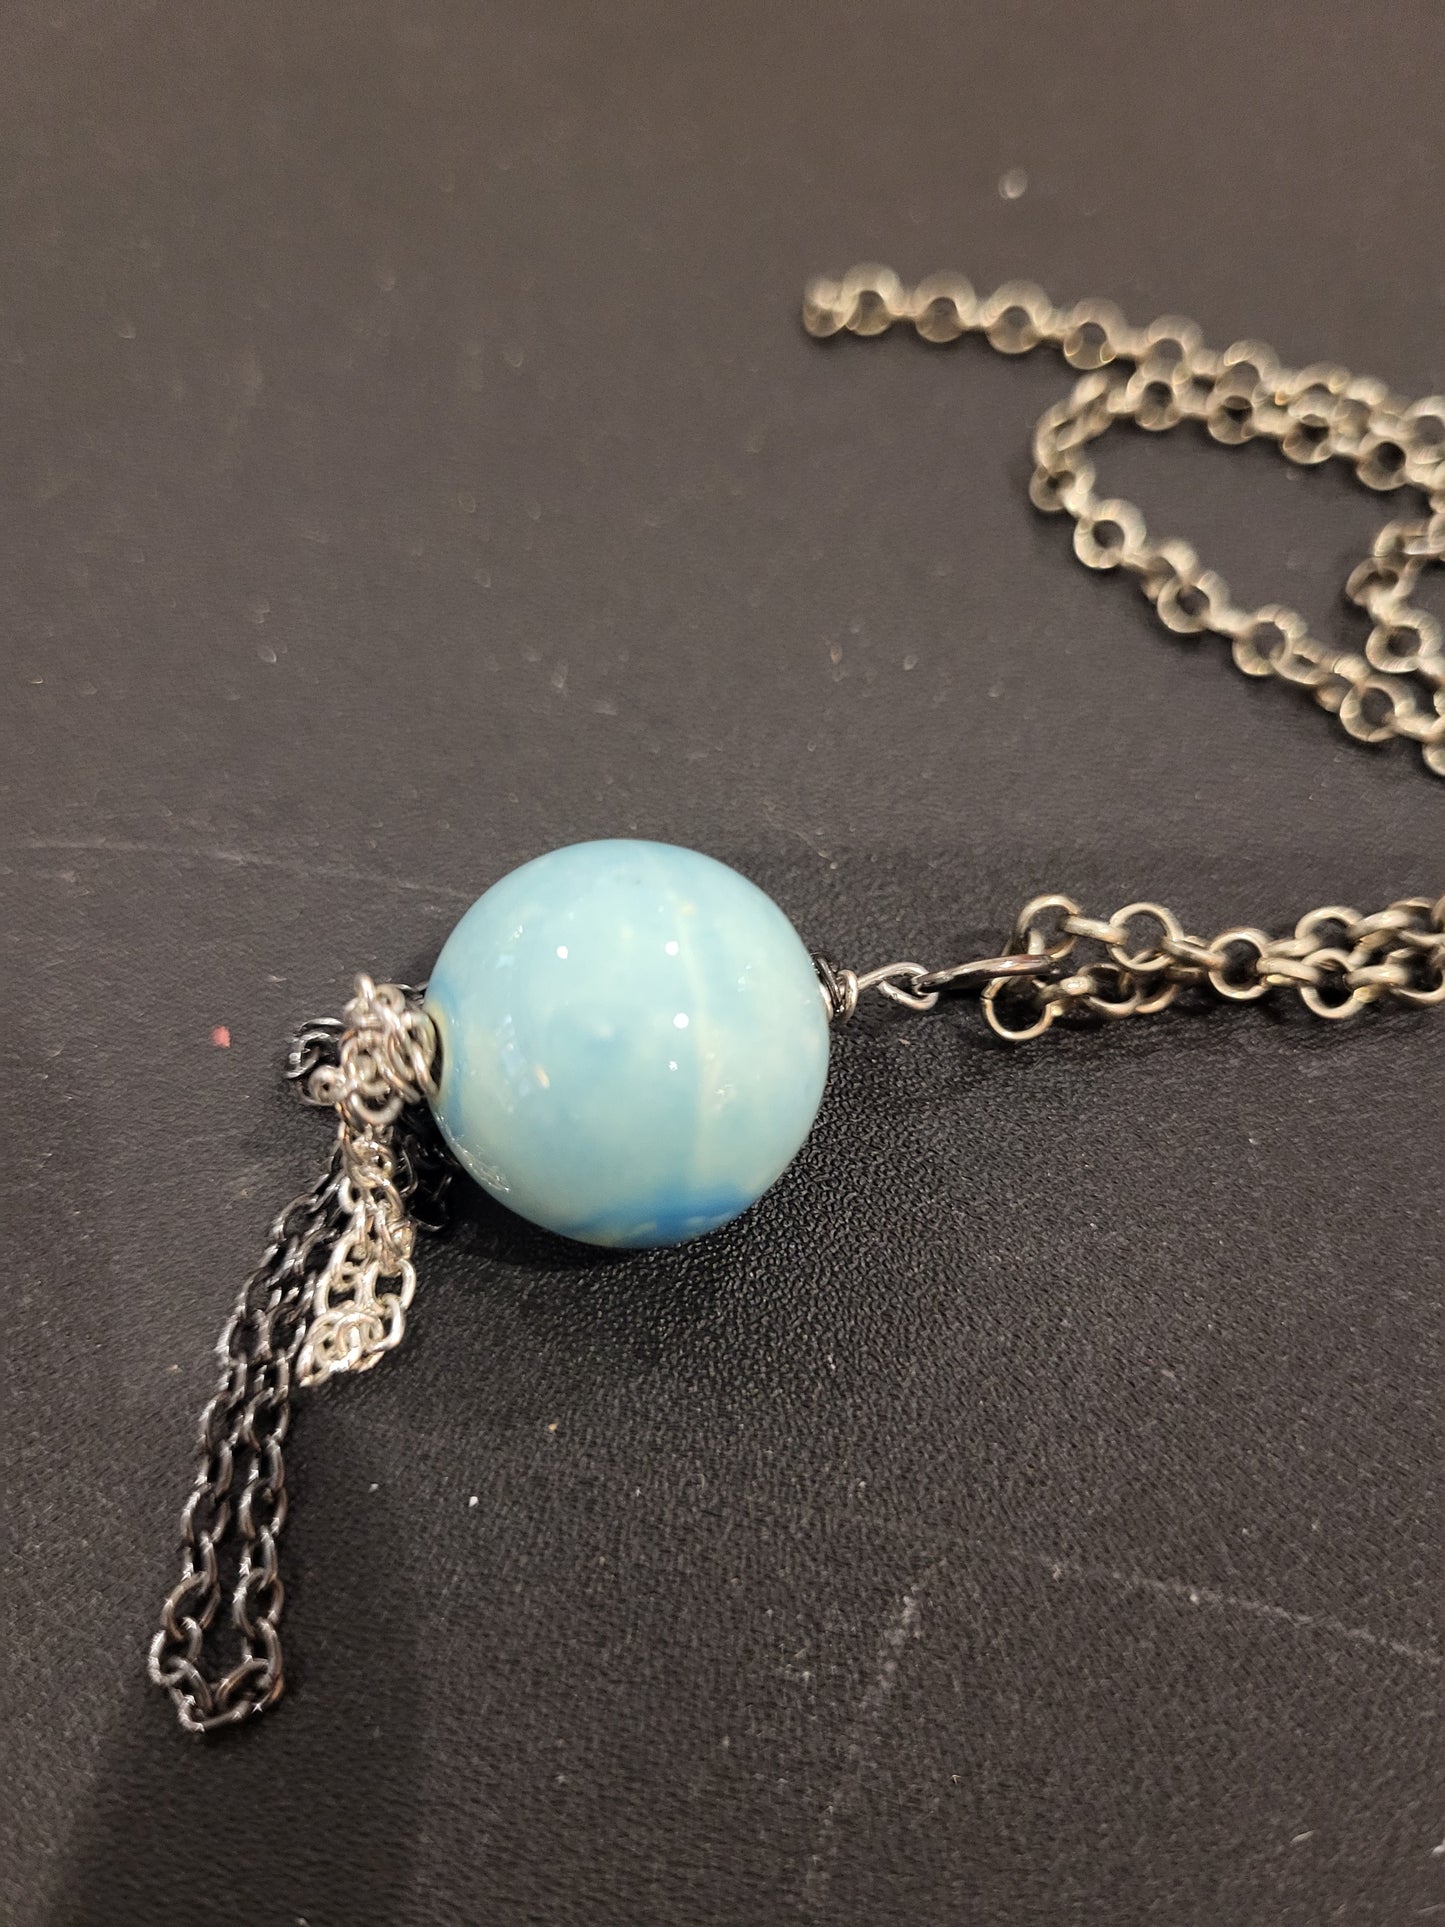 Handmade large blue bead necklace with chain accents